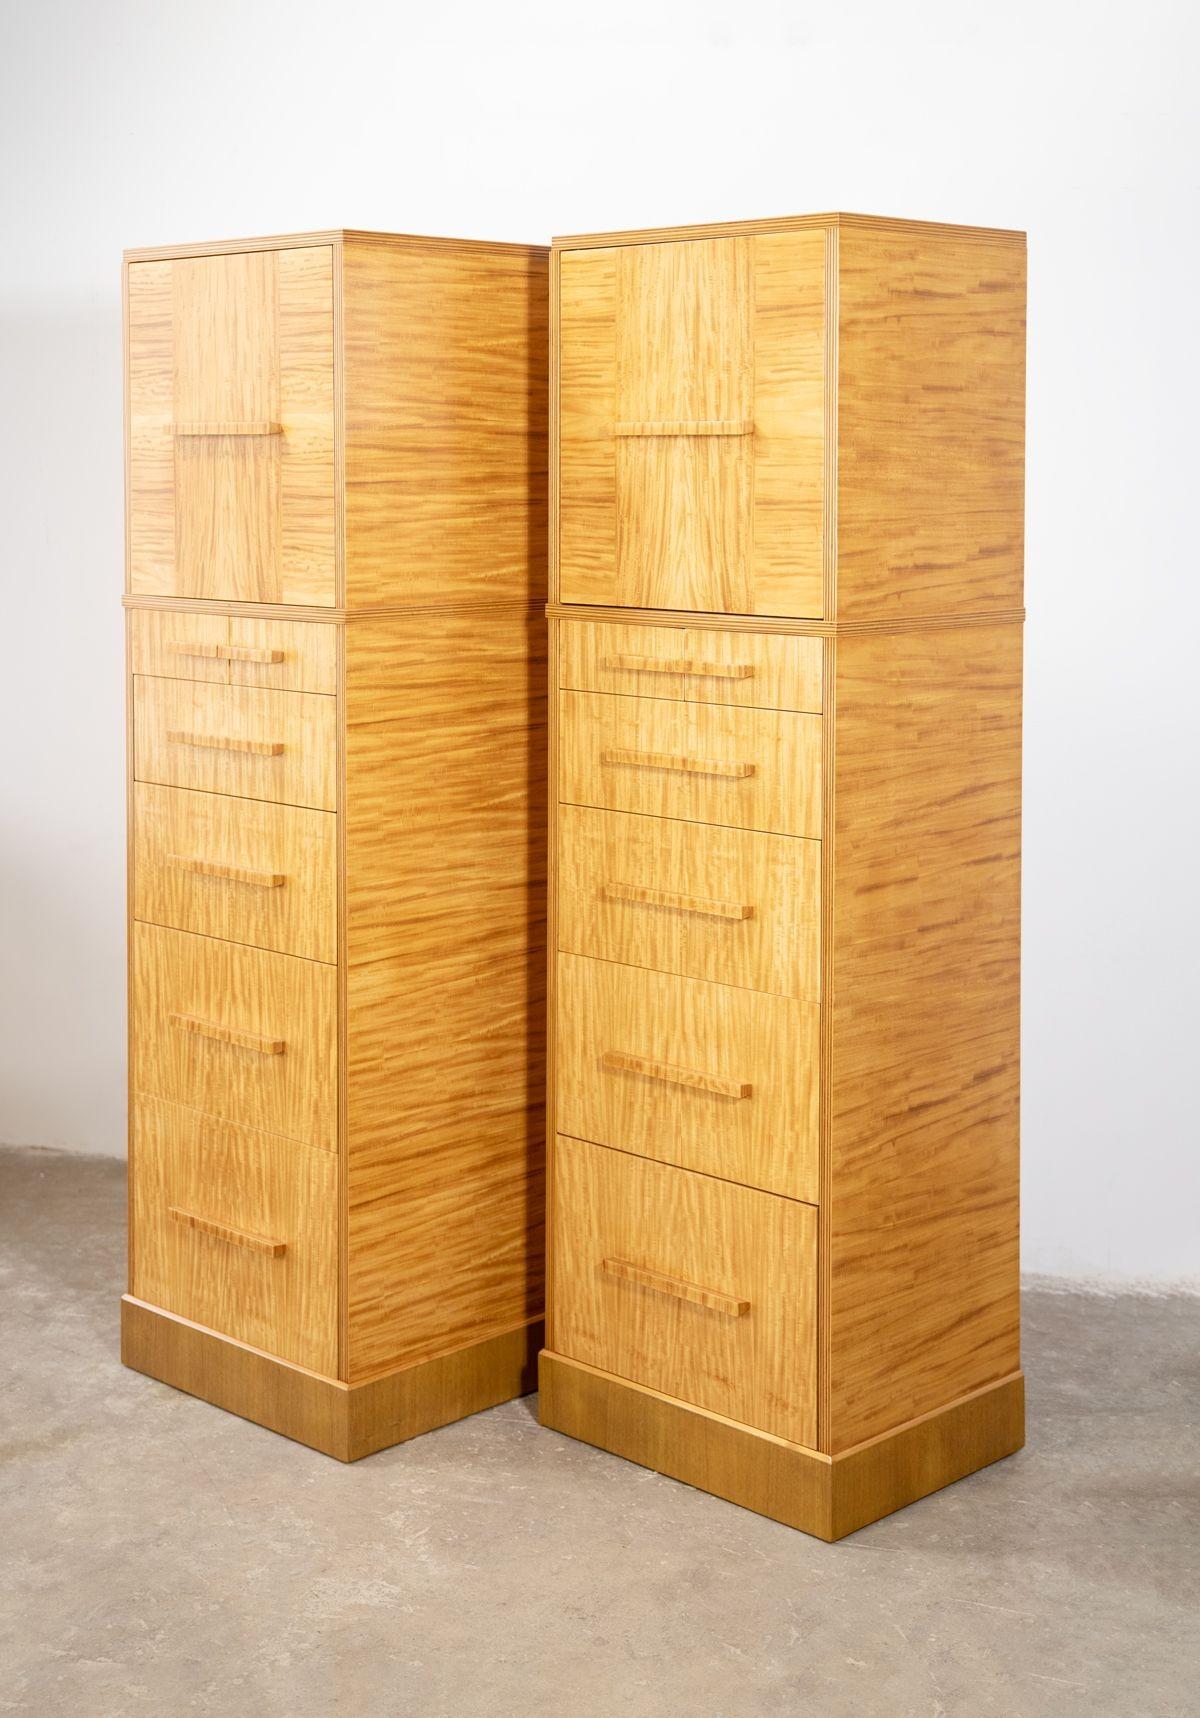 Extraordinary pair of tall skyscraper chests of drawers crafted from highly figured ribbon Avodire wood. They were constructed by the Holland Furniture Company in the 1940s. Donald Deskey at this time was also designing for the Baker furniture